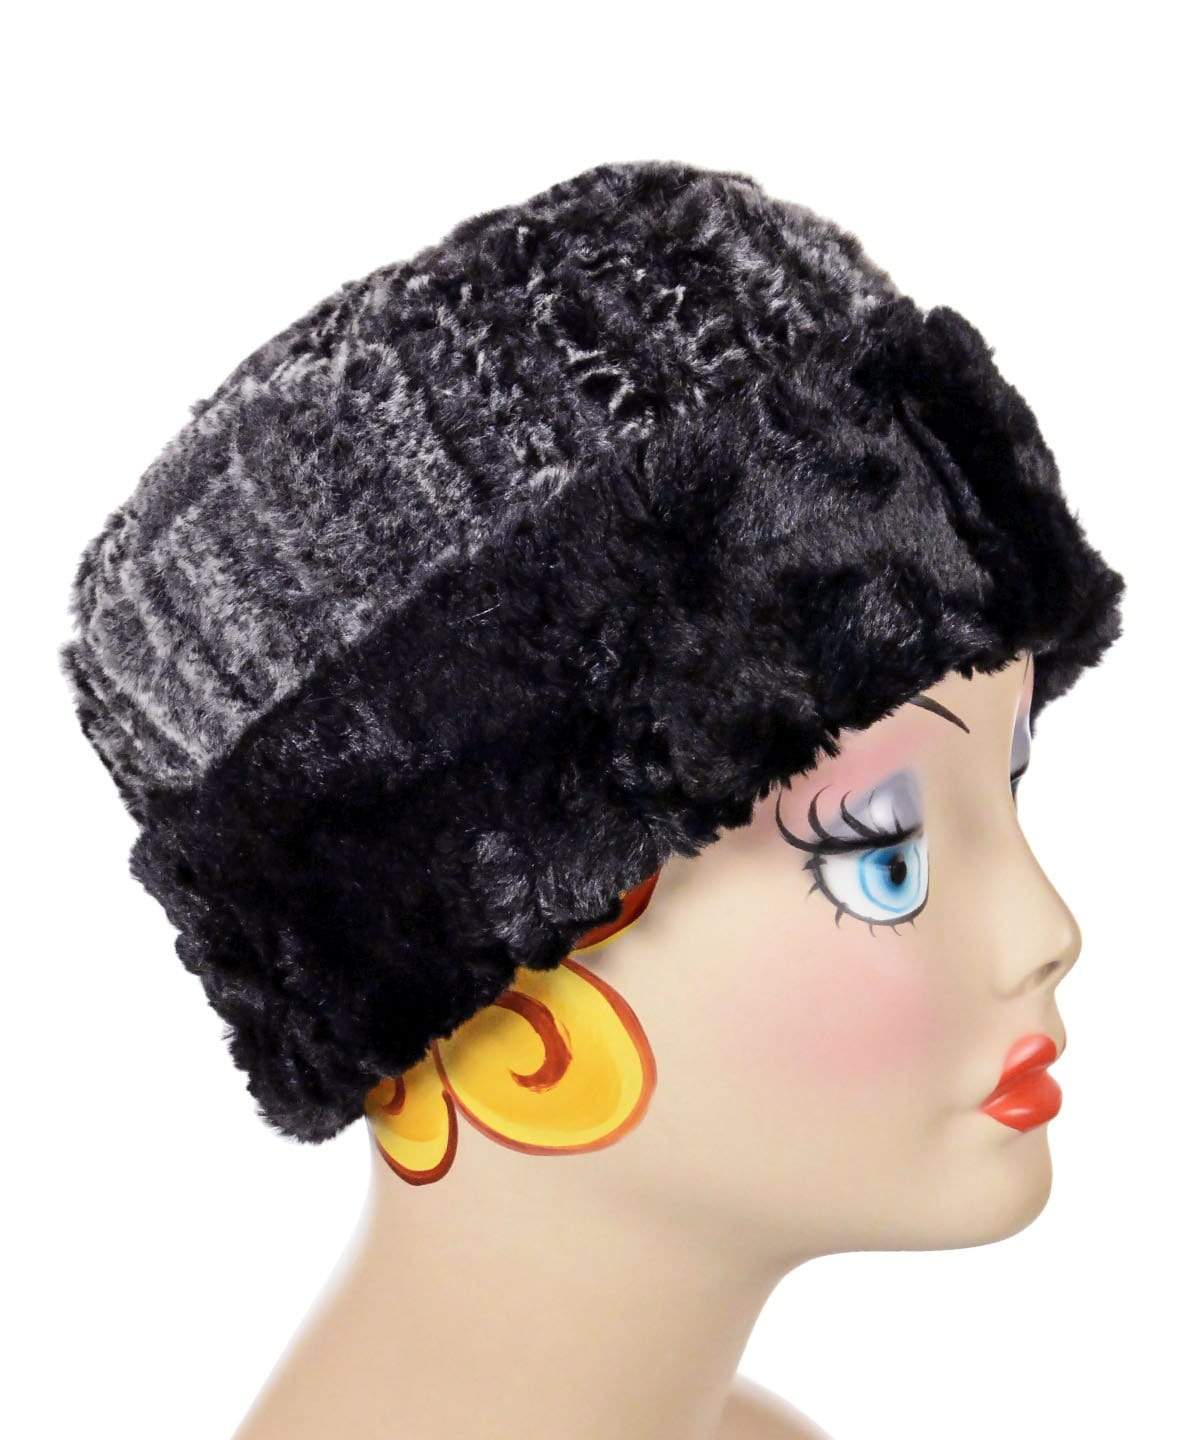   Women&#39;s Cuffed Pillbox on mannequin shown in reverse | Rattle ‘n’ Shake Faux Fur  with Cuddly Black | Handmade USA by Pandemonium Seattle